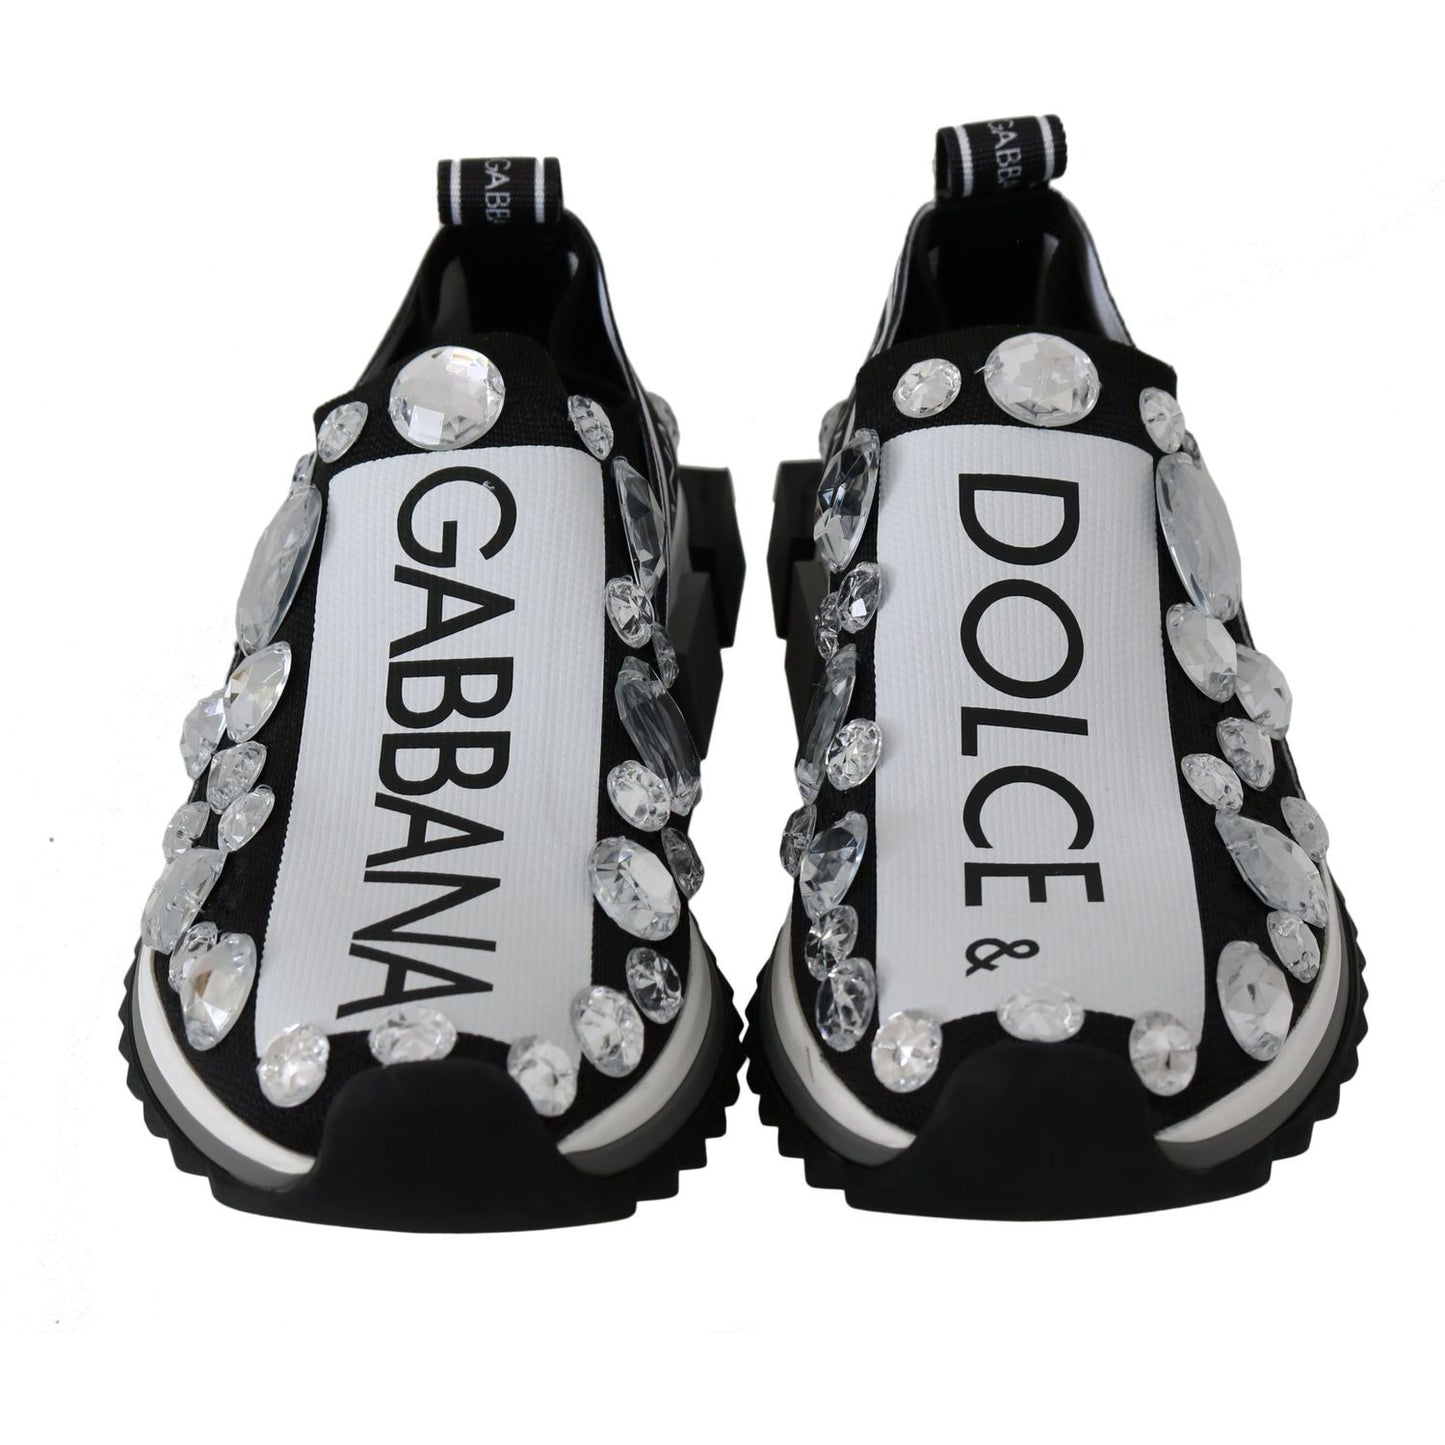 Dolce & Gabbana Chic Monochrome Crystal Studded Sneakers black-white-crystal-womens-sneakers-shoes